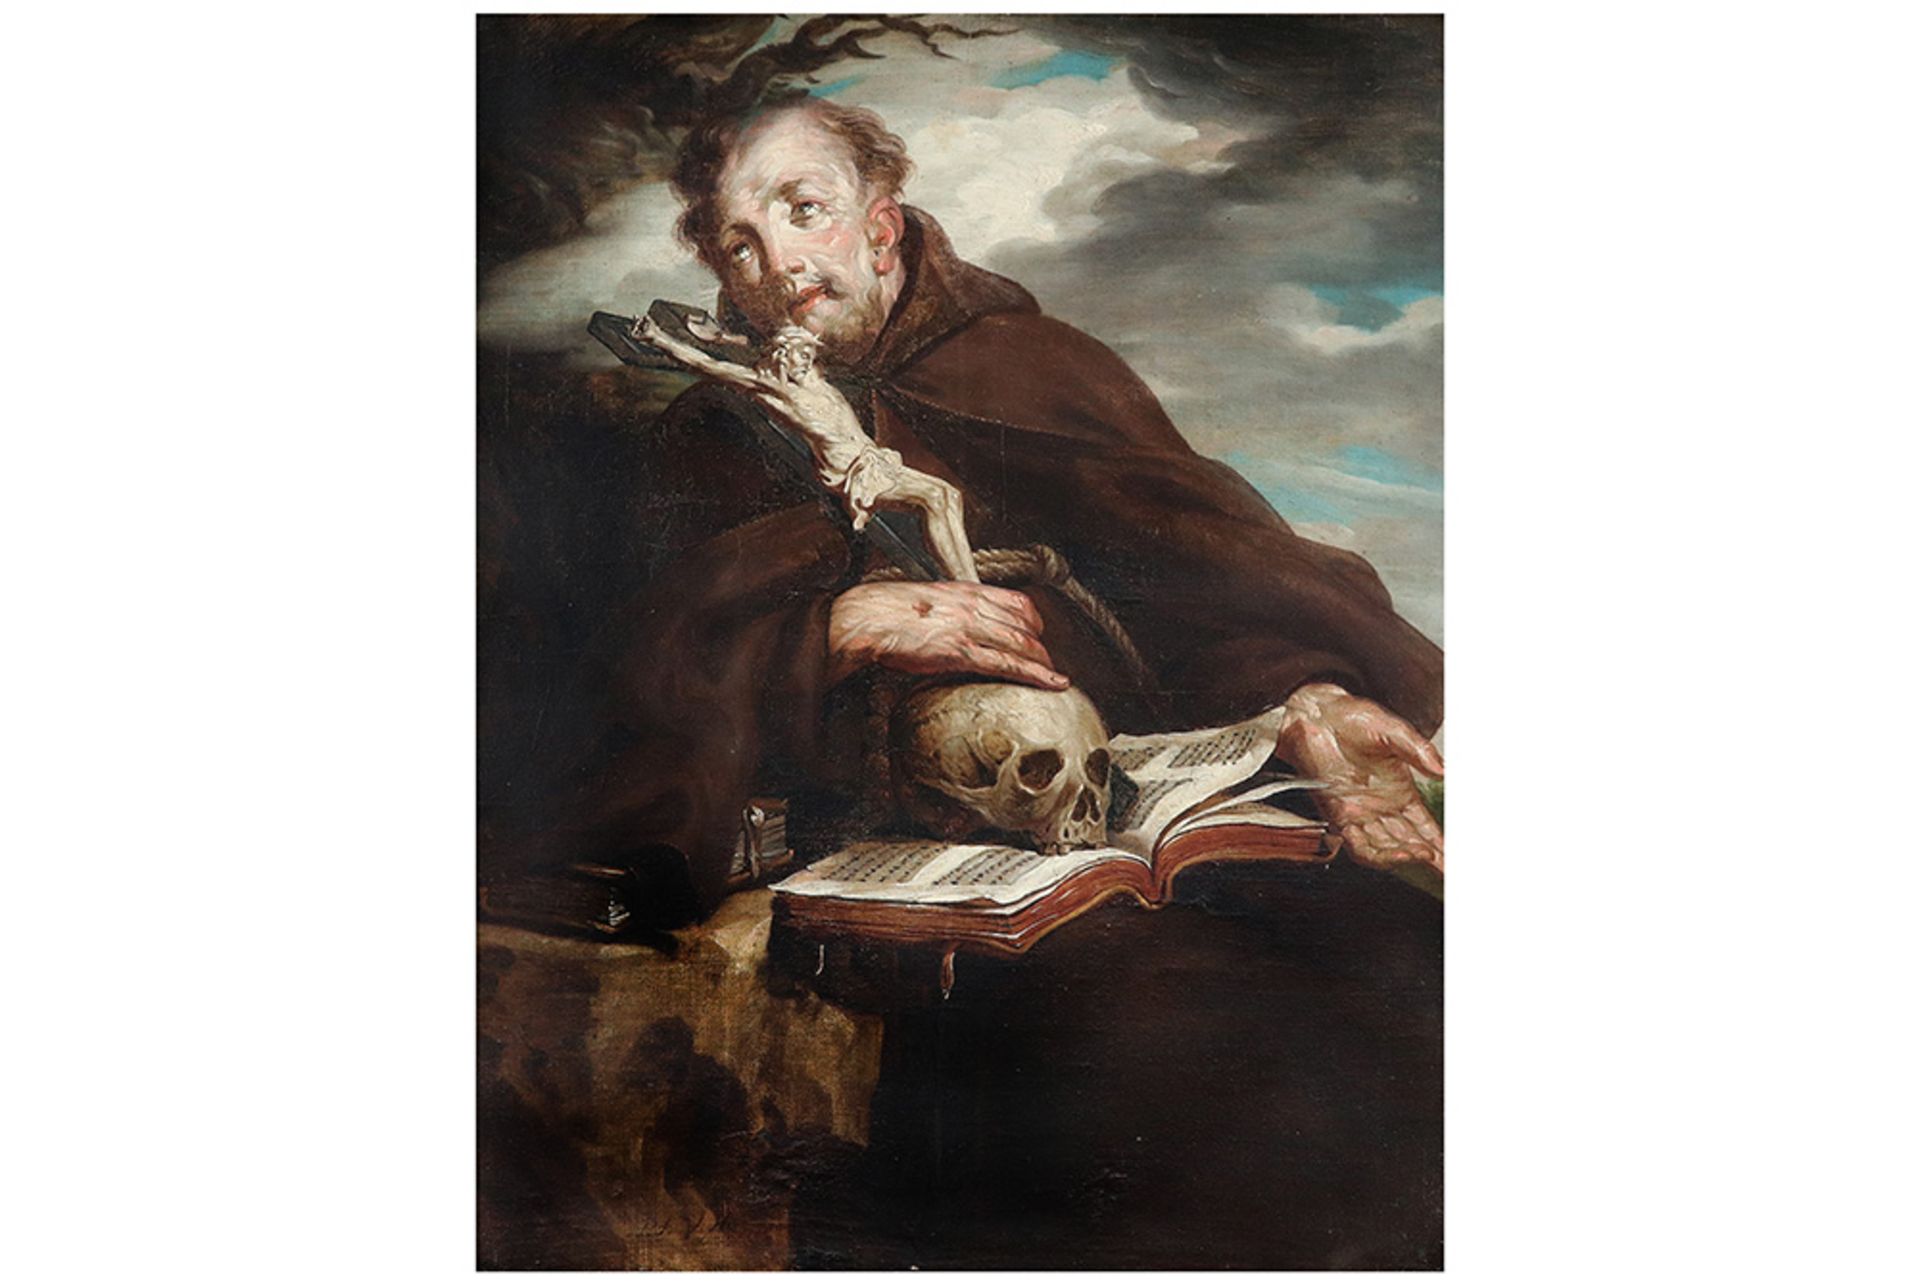 18th Cent. oil on canvas with the representation of Saint Franciscus - with the monogram of Pierre